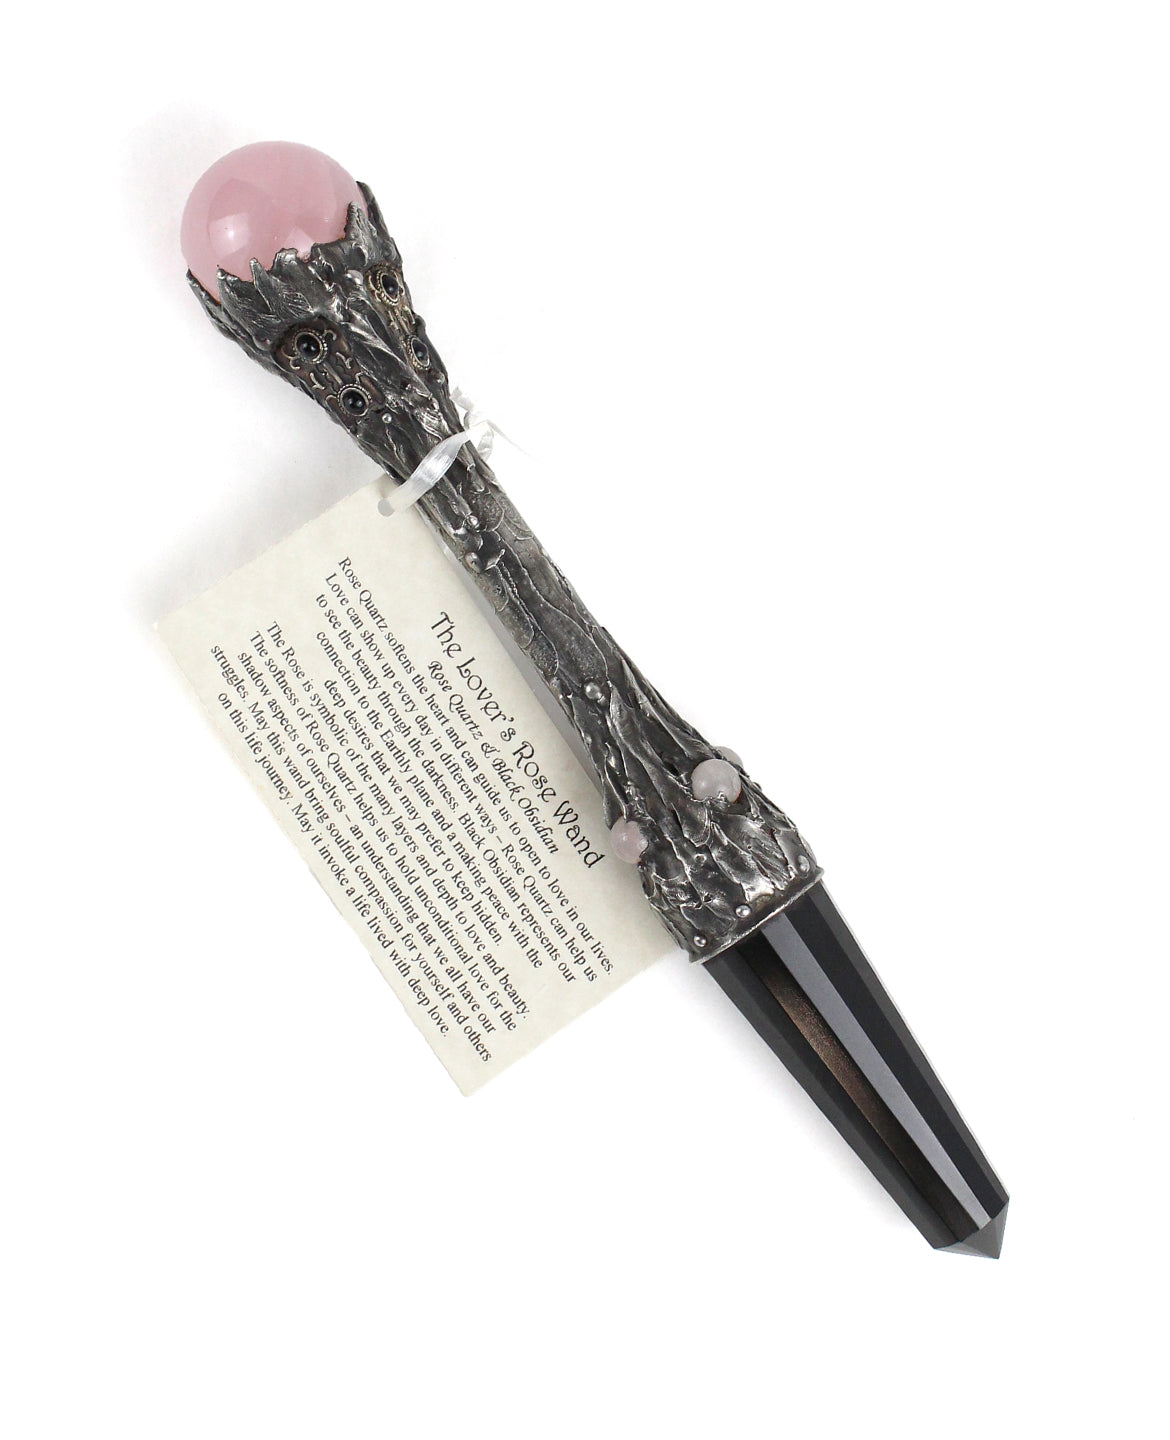 The Lover's Rose Wand